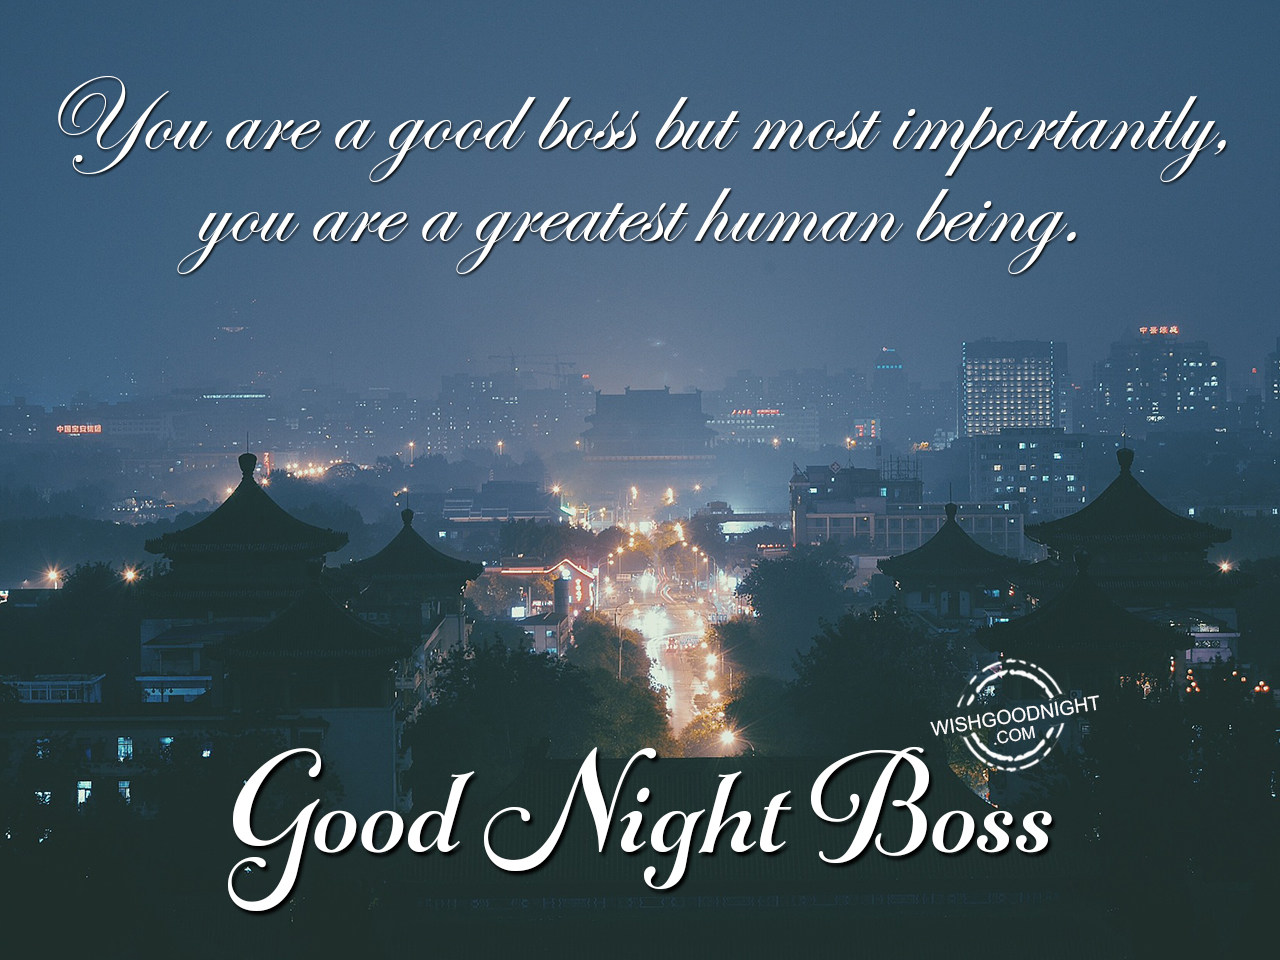 You Are Good Boss Good Night Boss Good Night Pictures Wishgoodnight Com